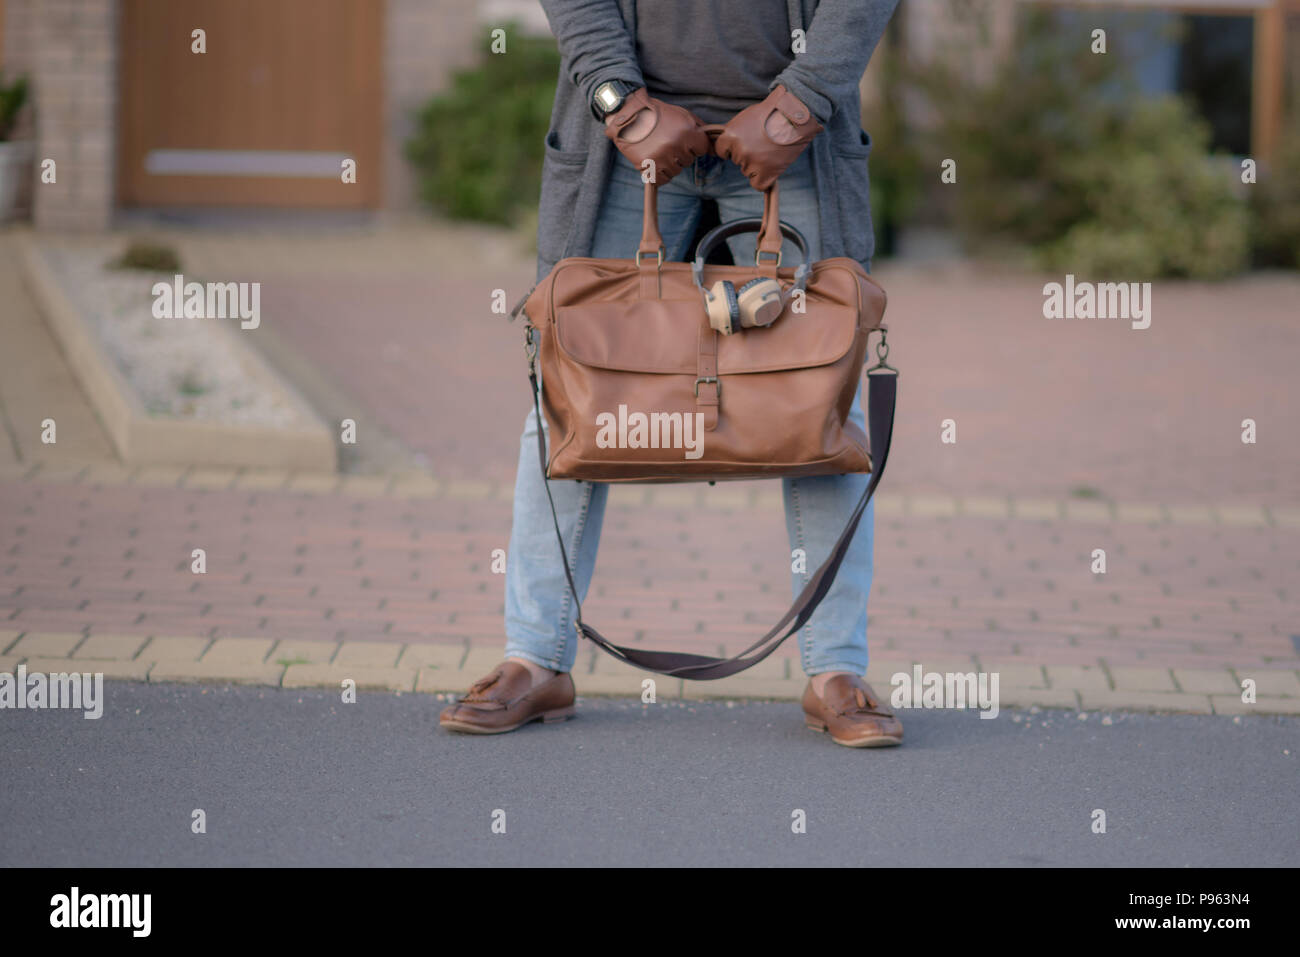 Man with leather bag, leather shoes, leather gloves Stock Photo